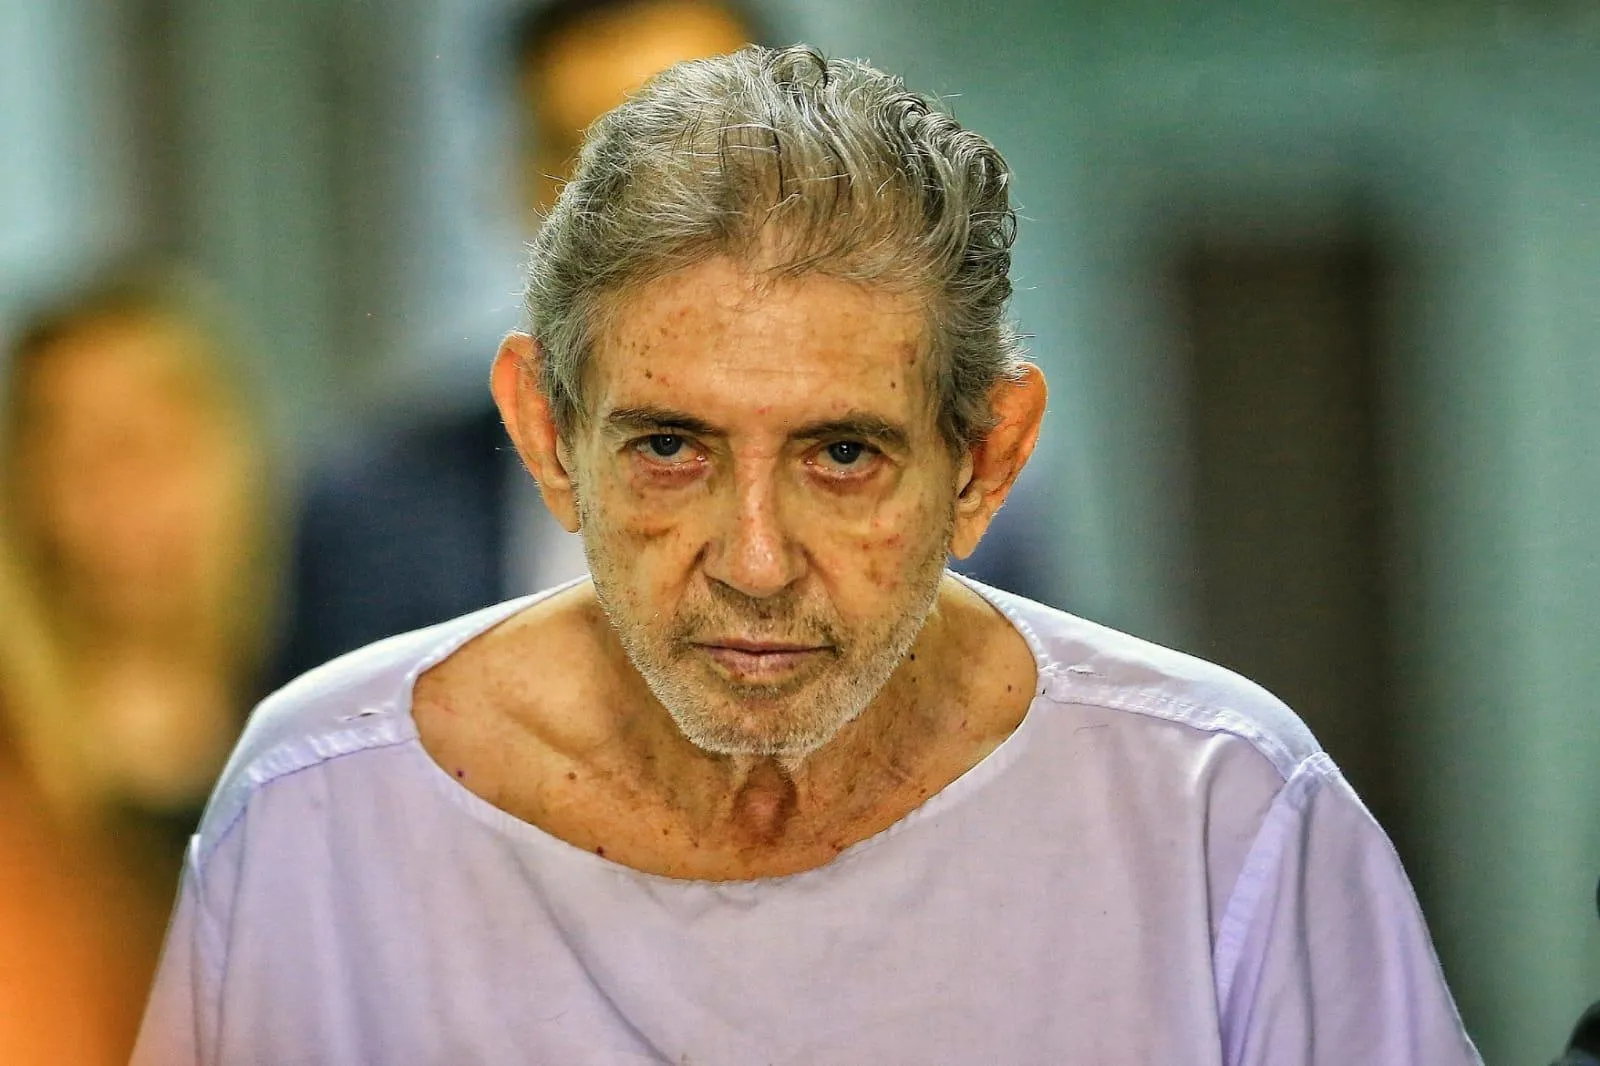 João de Deus is sentenced to almost 100 years for rape and must compensate victims up to R$ 100,000 |  the popular